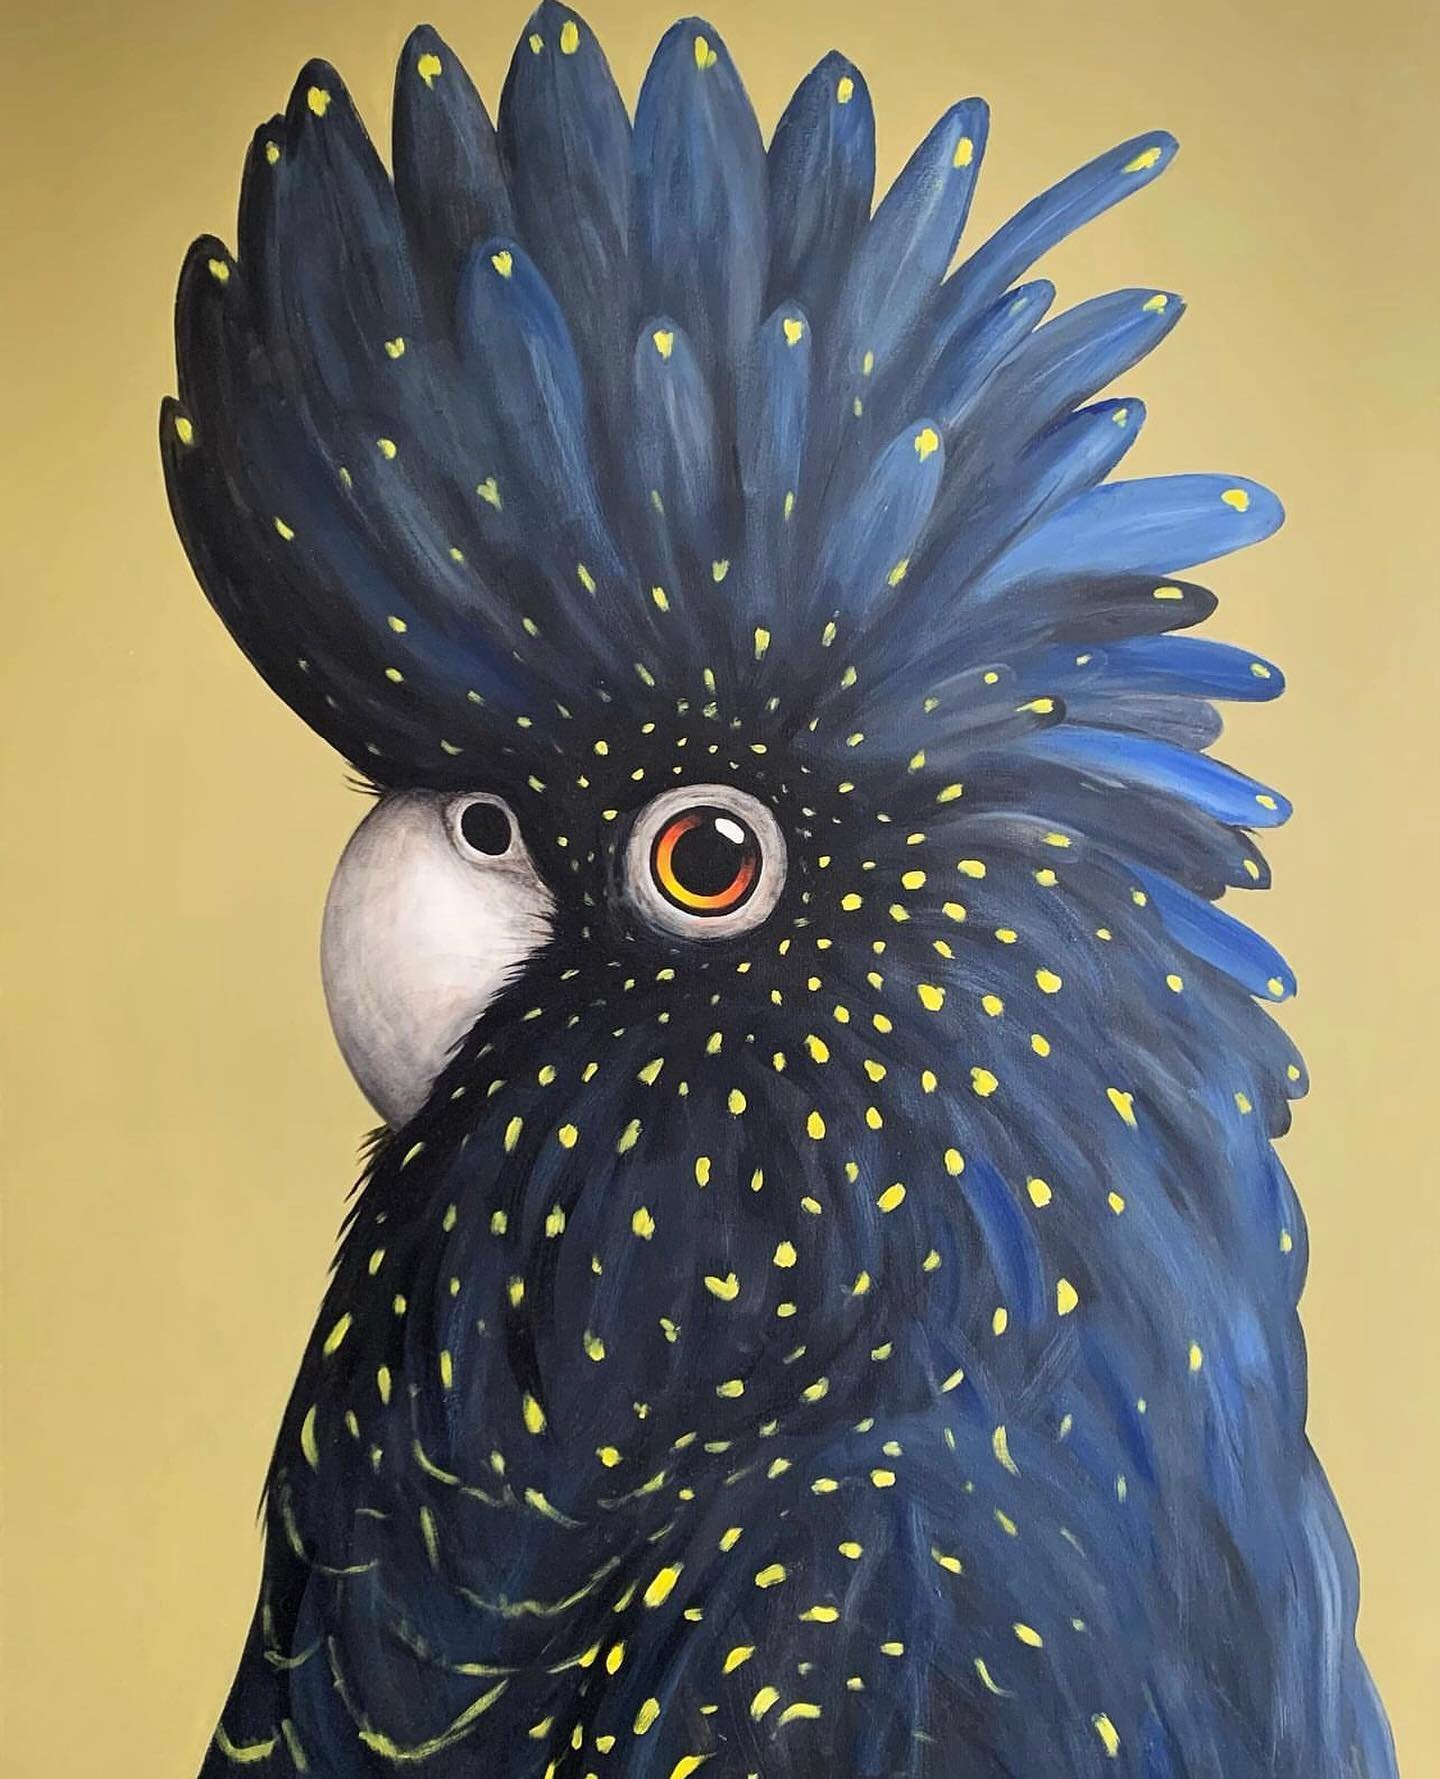 Happy Saturday! Today we&rsquo;re sharing Mudgee artist @charles_smith_art stunning portrait of a black cockatoo size 122cm x 92cm. The details are colours are amazing! 

Charles Smith lives and paints in Mudgee and he loves to capture the unique per